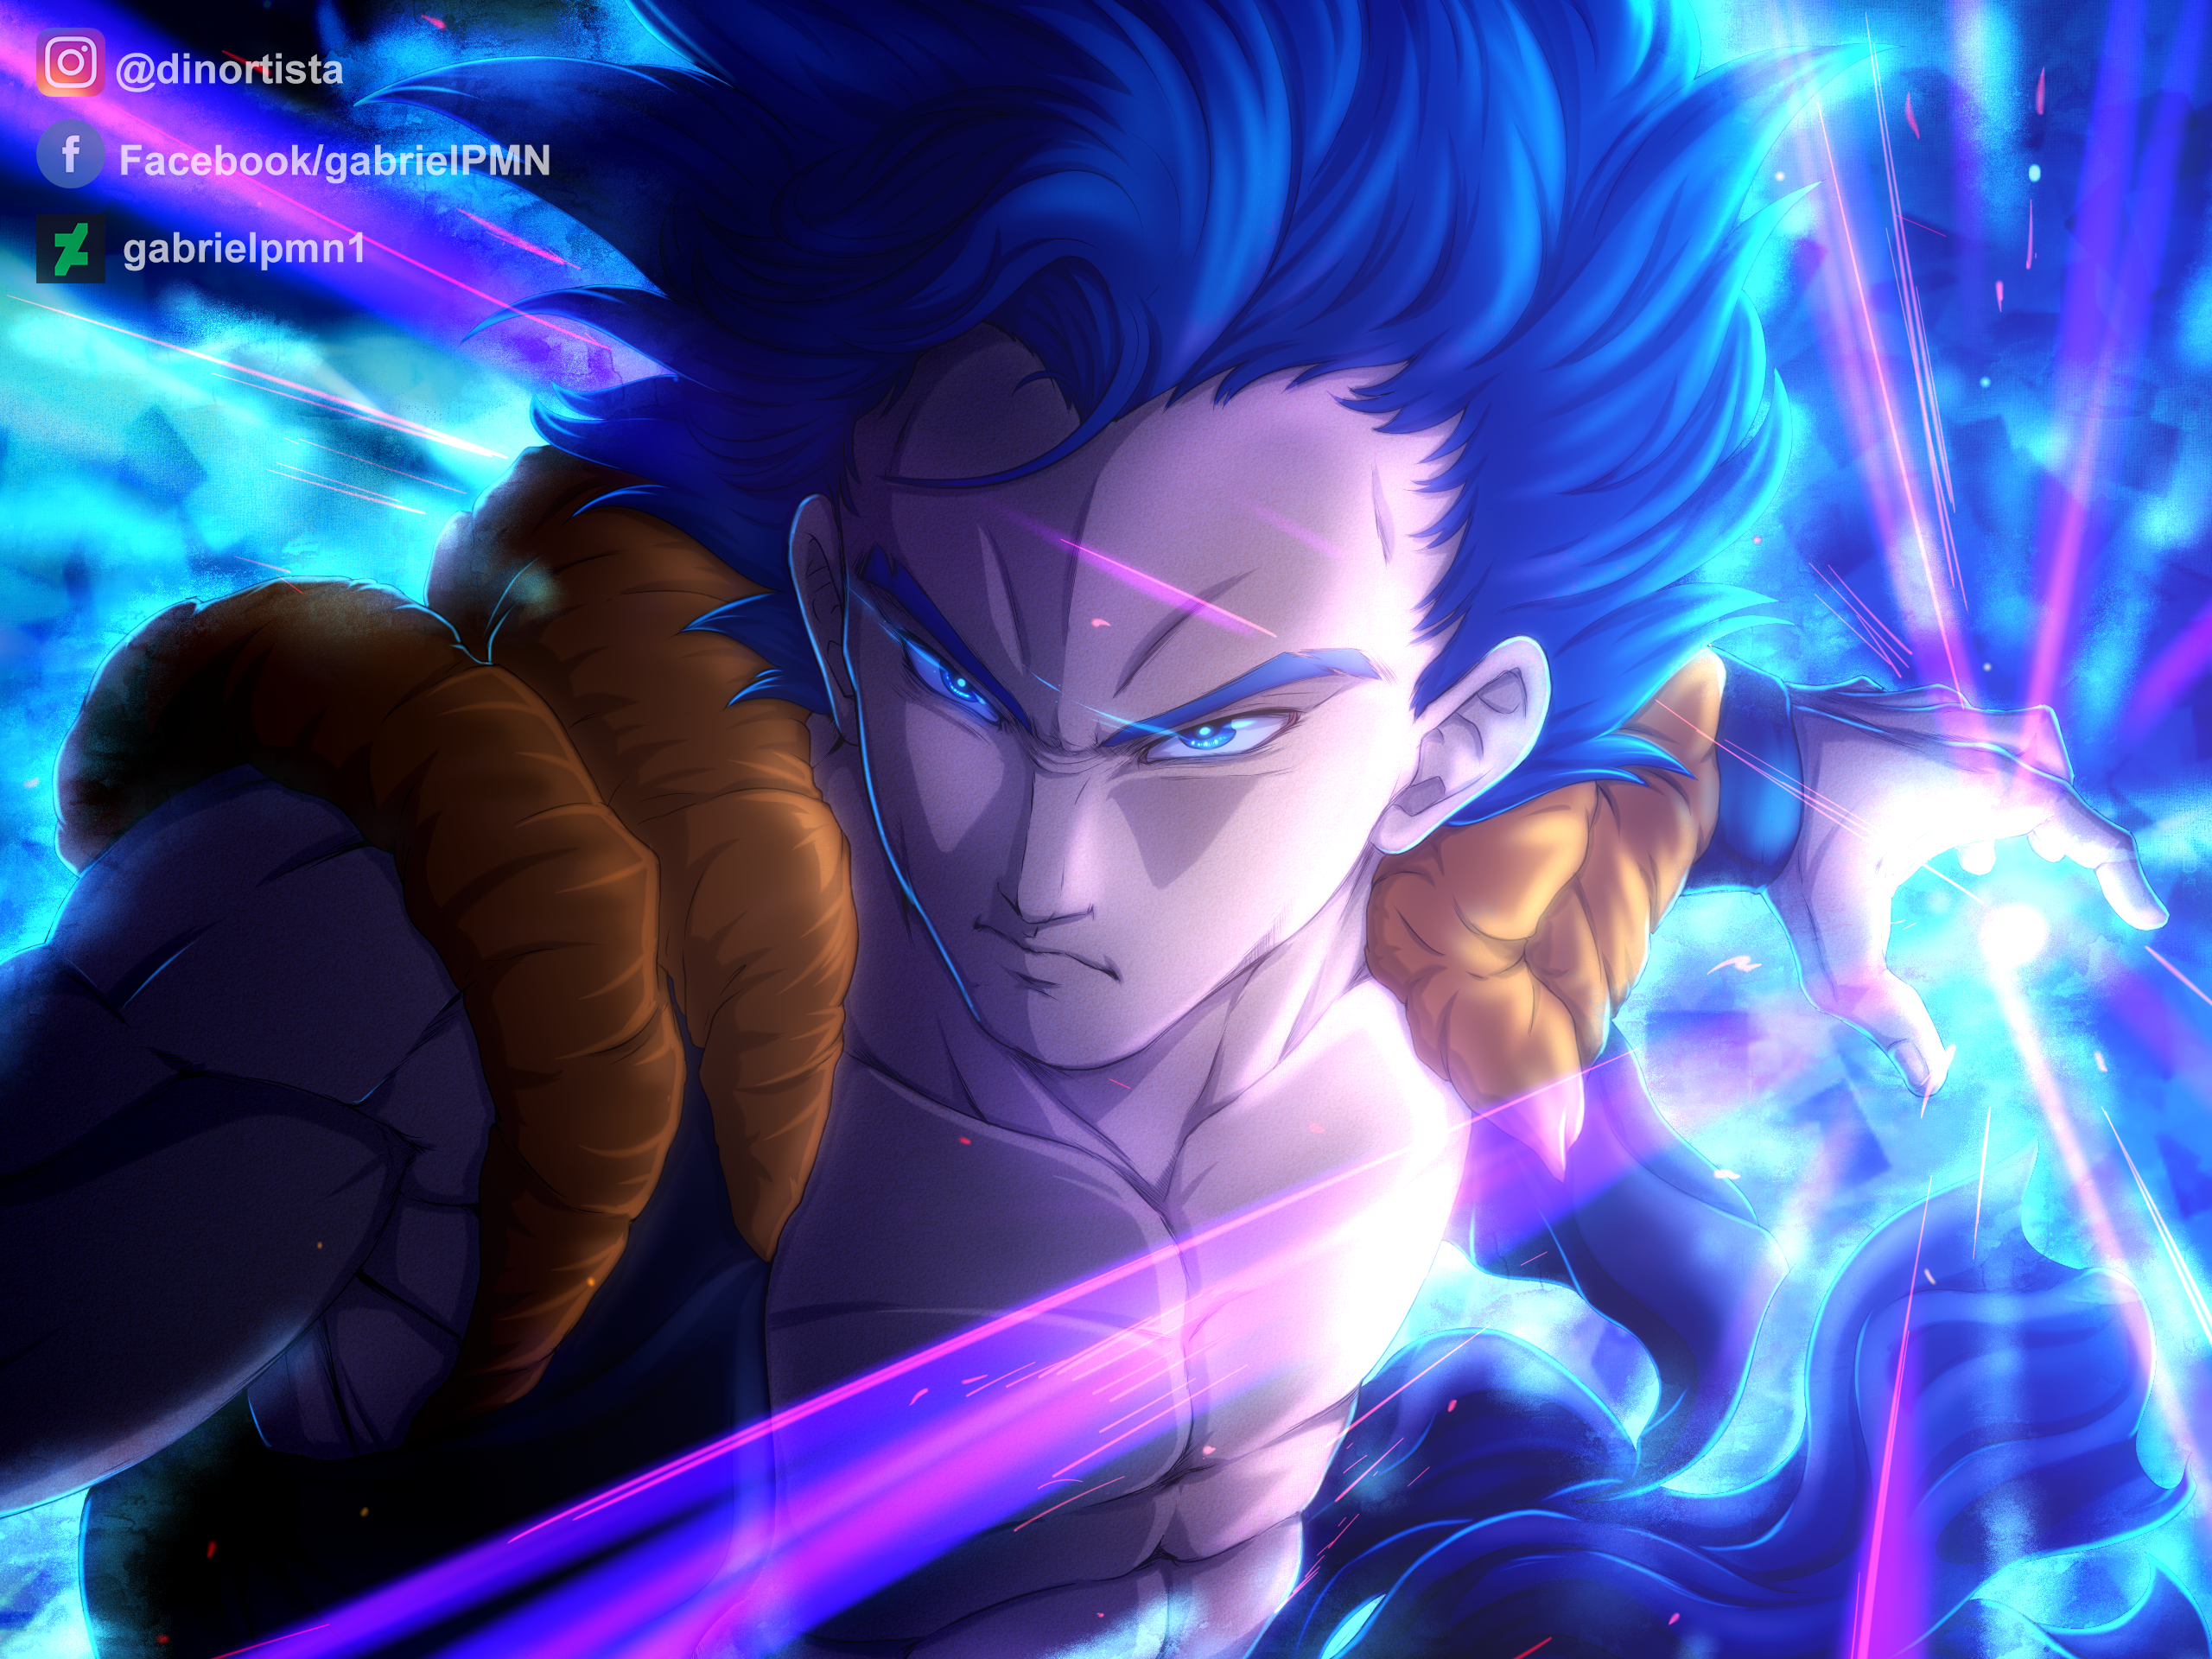 Dragon Ball Super: Broly HD Wallpapers, Pictures, Images